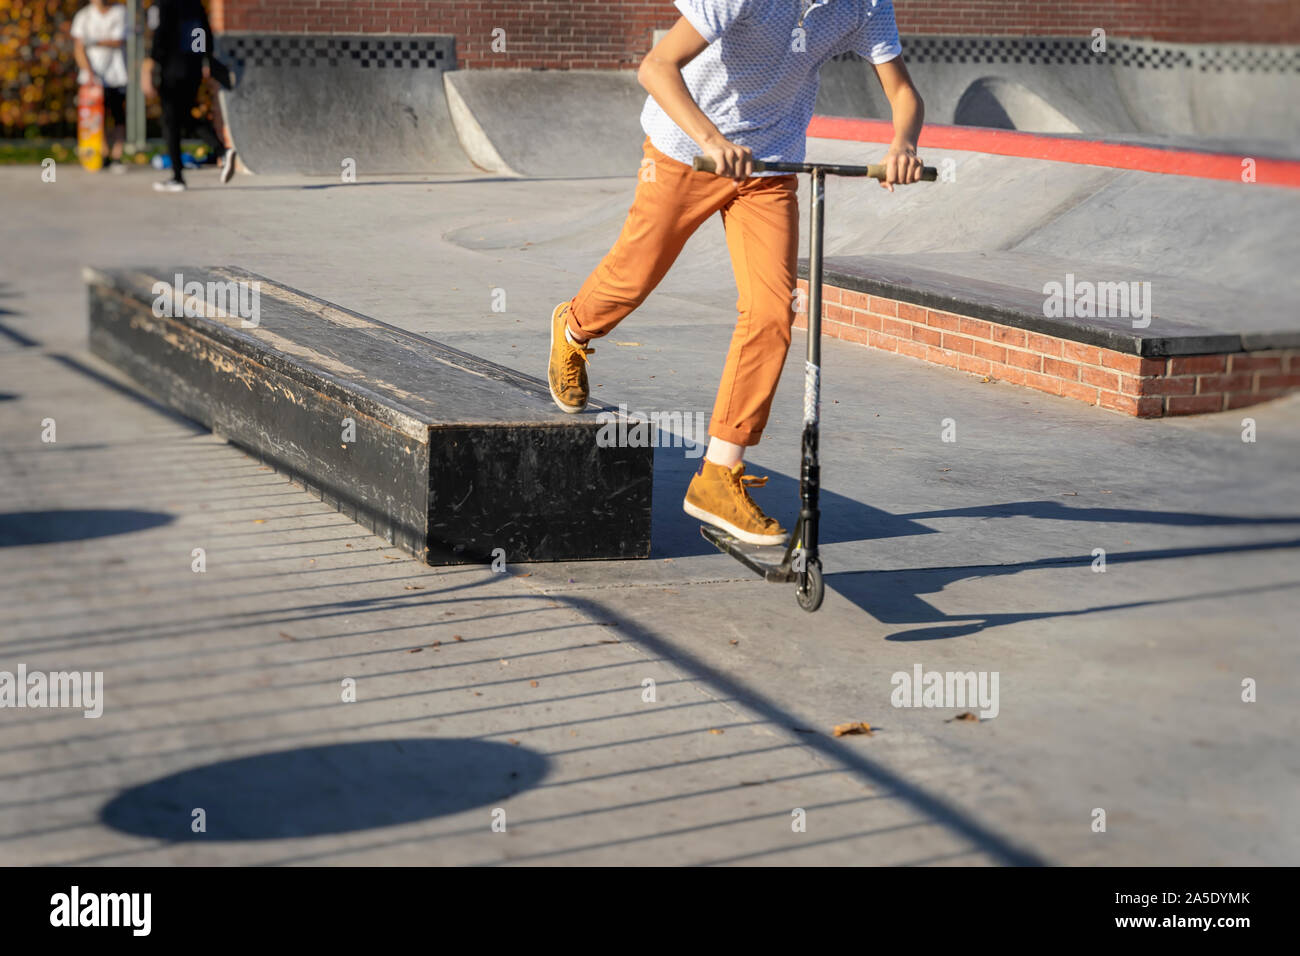 Feet in yellow sneakers and pants of teenager jumping a kick scooter at a skate park. Street culture of young Stock Photo